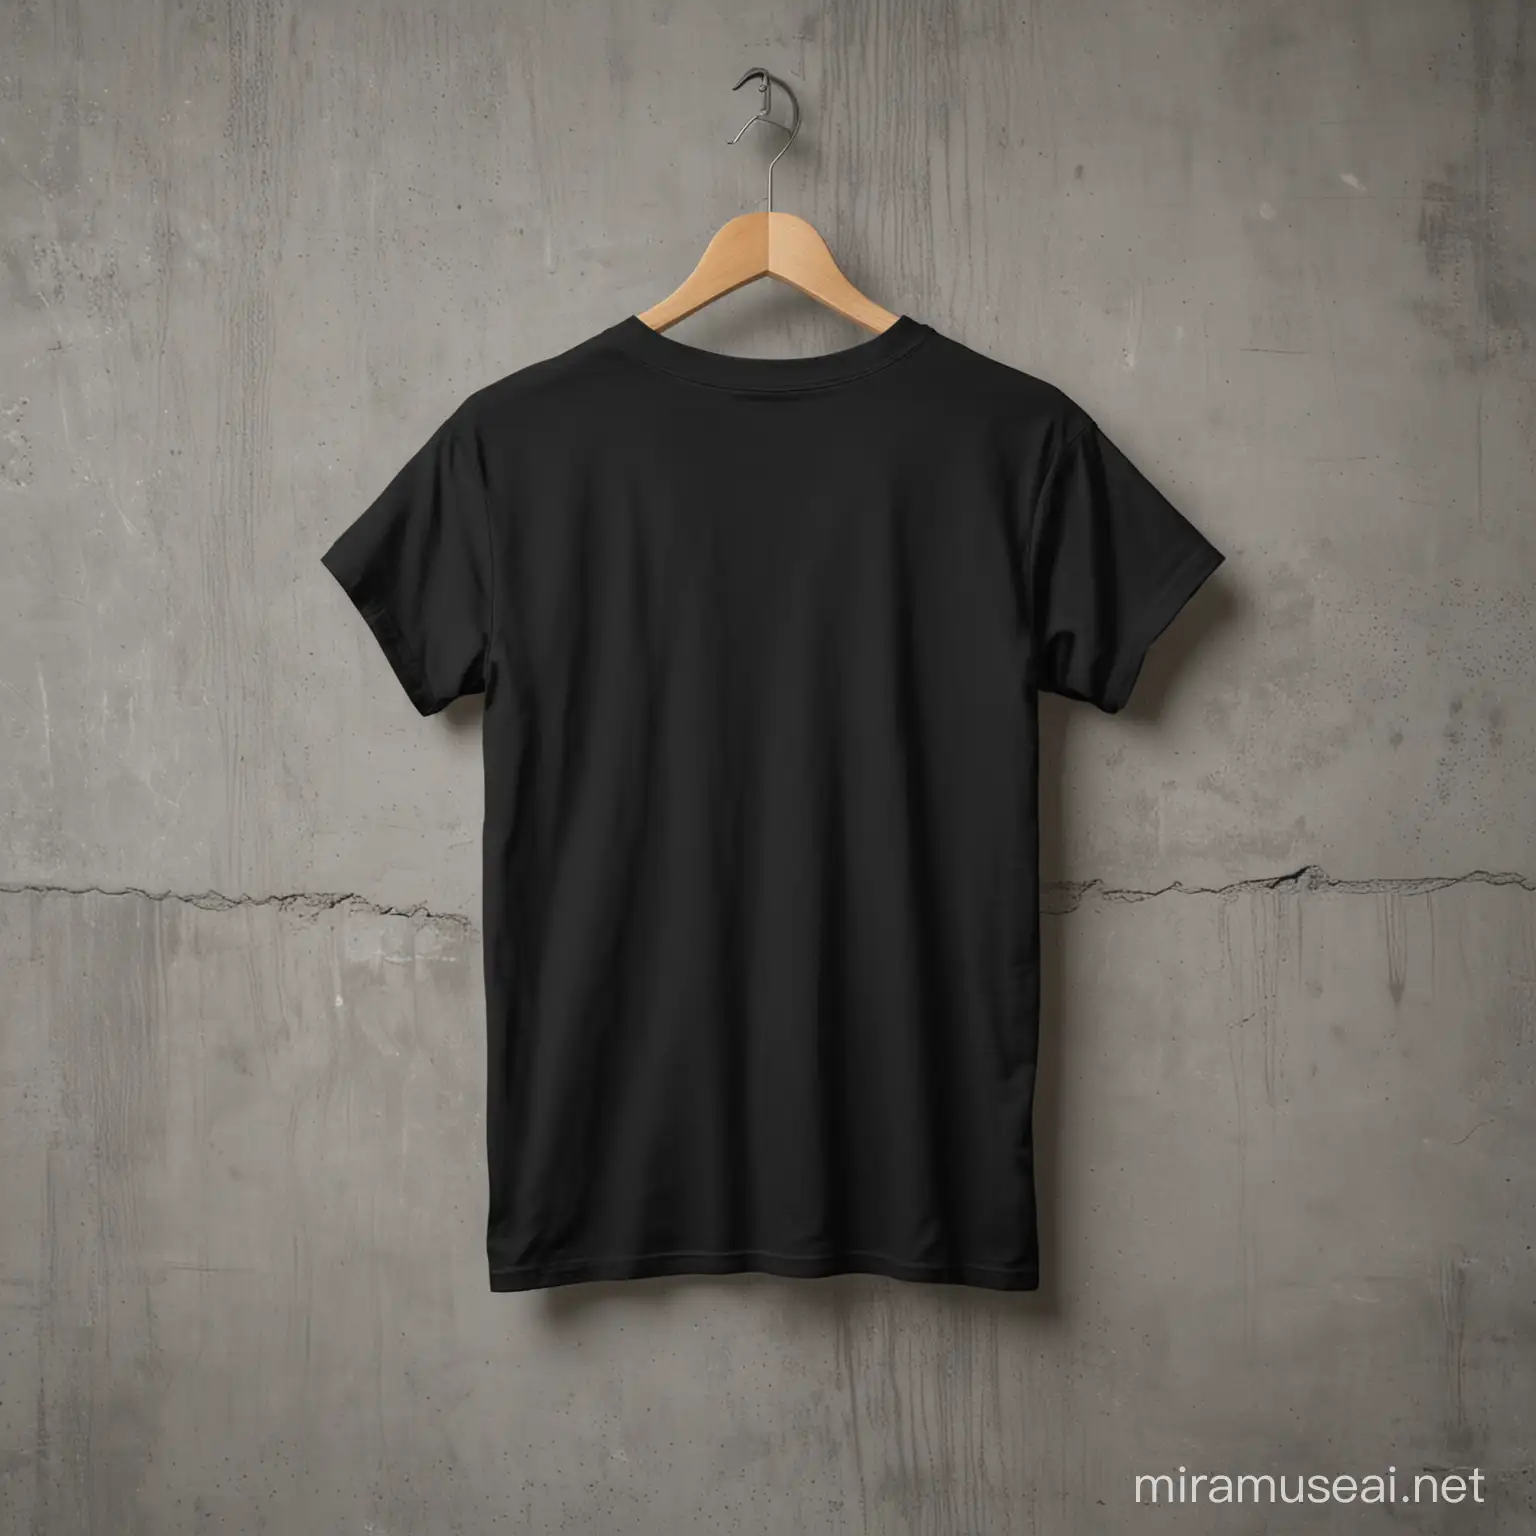 Gildan 64000 black t-shirt mockup showing the back, hanging from a wall cement industrial studio background